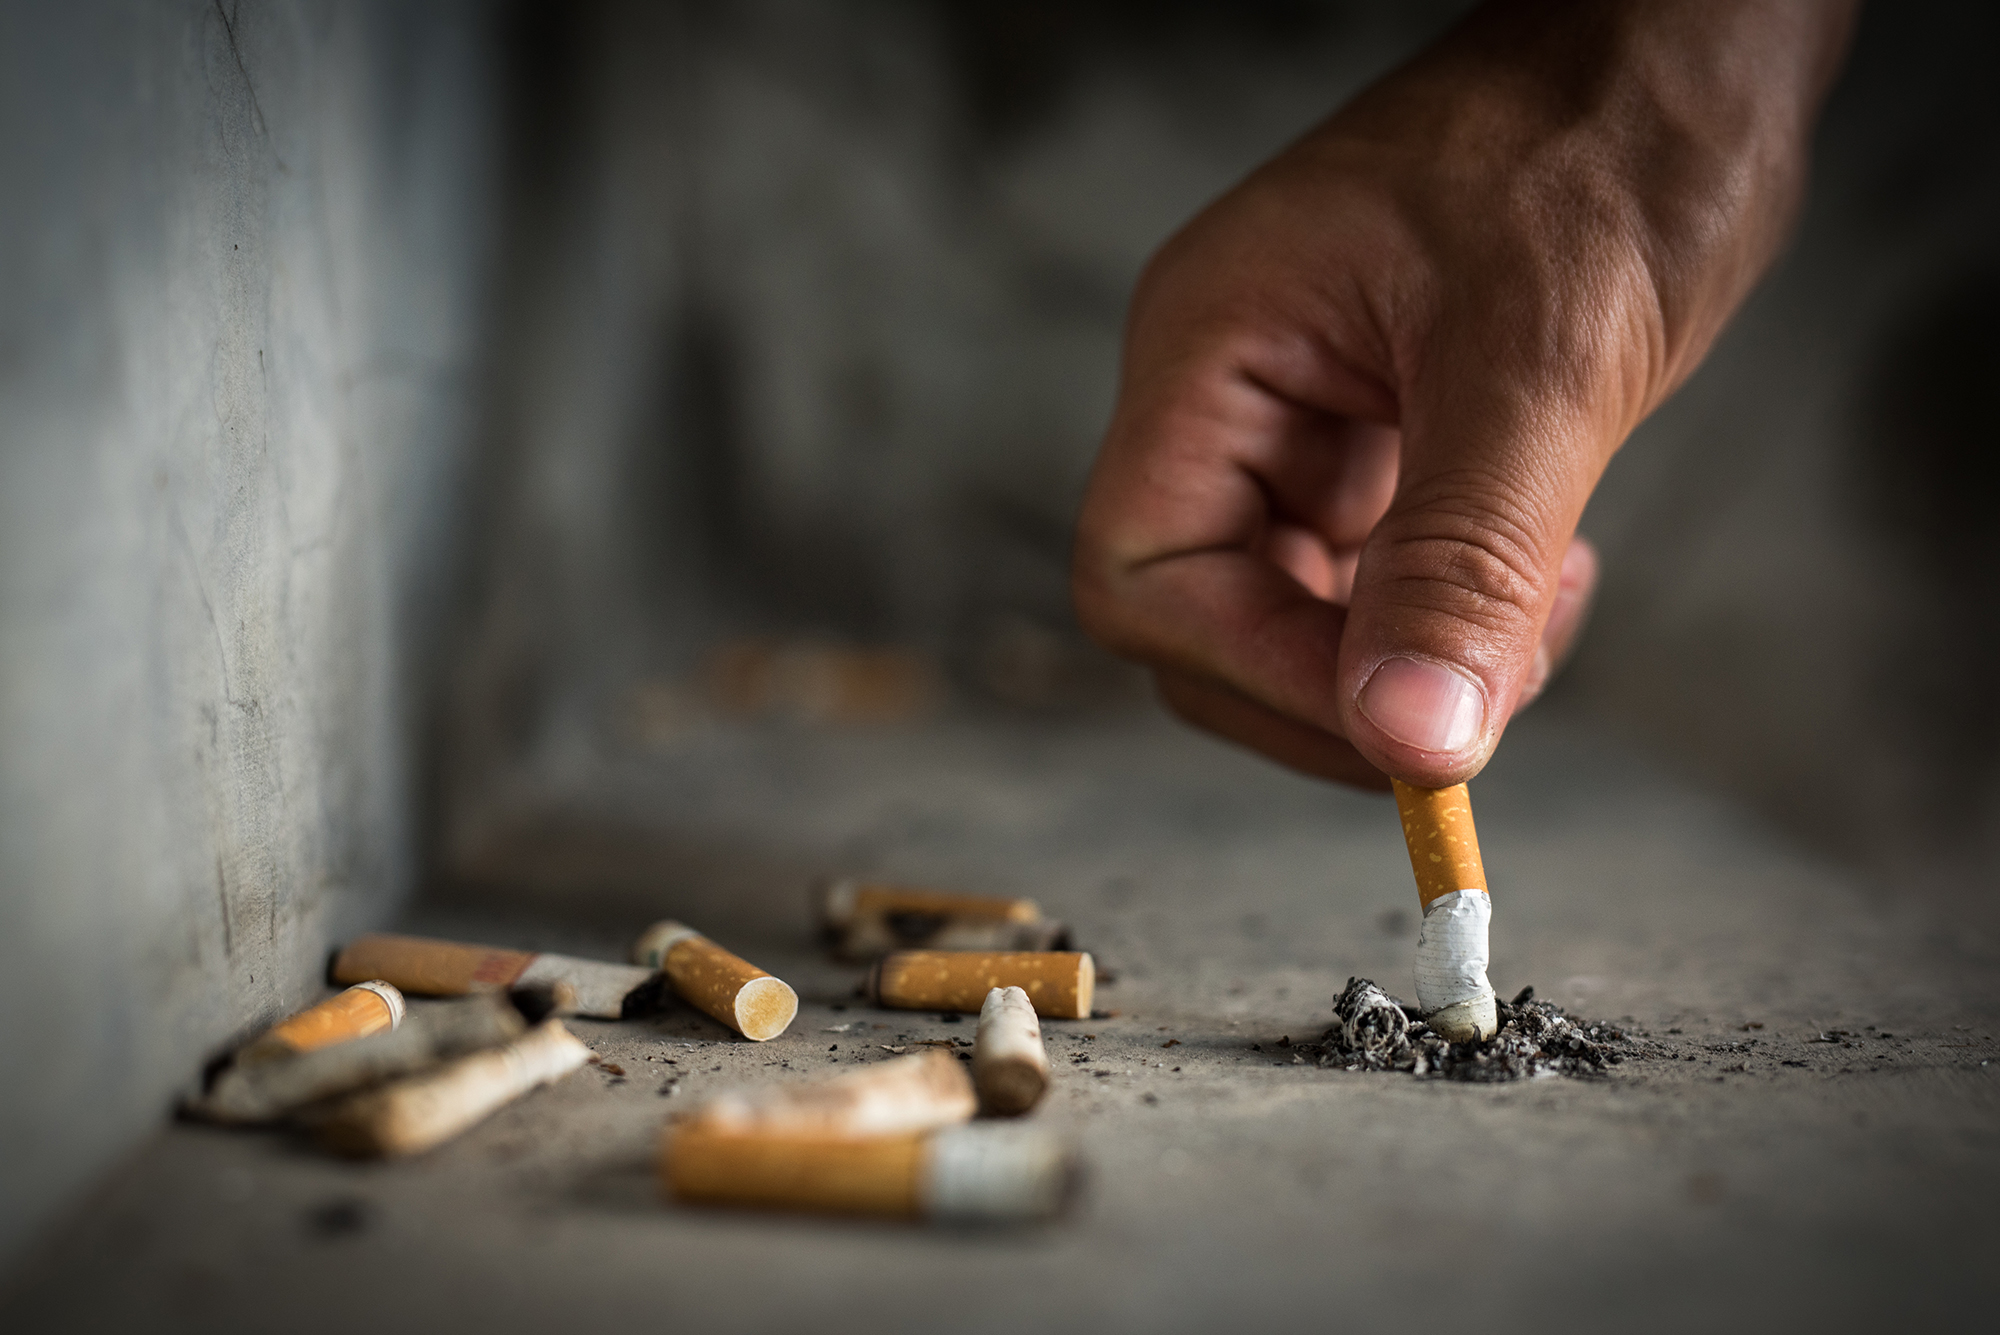 We must provide tobacco users the help they need to quit